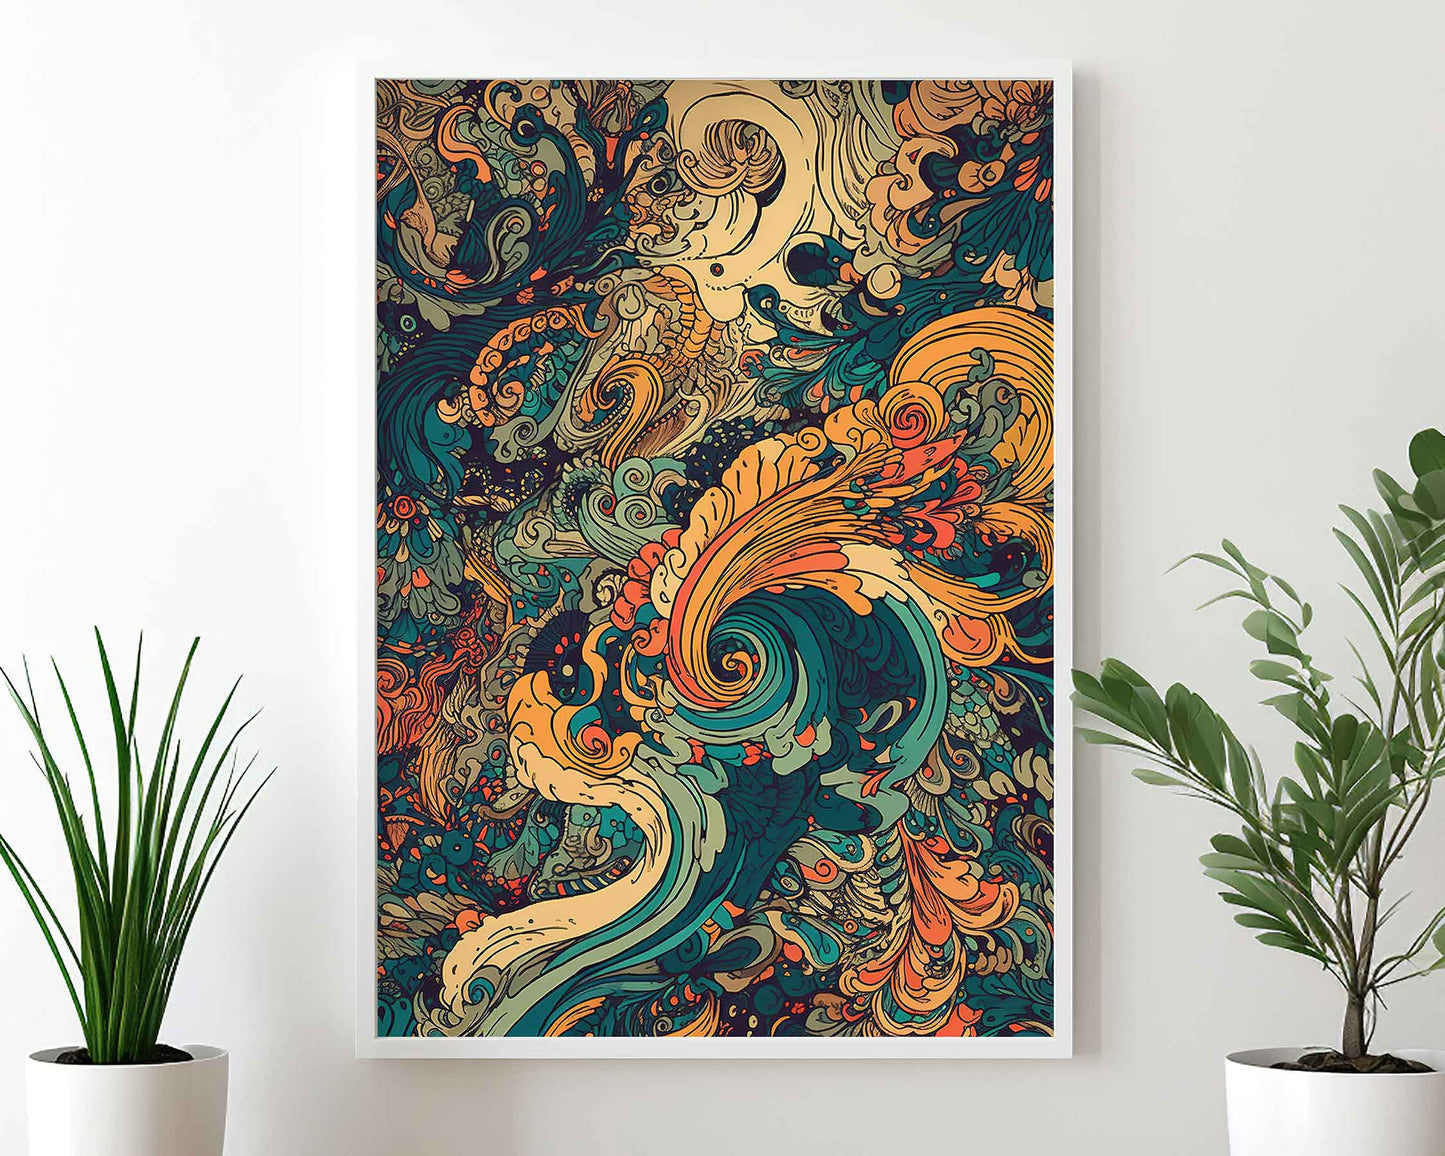 Framed Image of Art Nouveau Parisian Vintage 70s Psychedelic Wall Art Poster Print